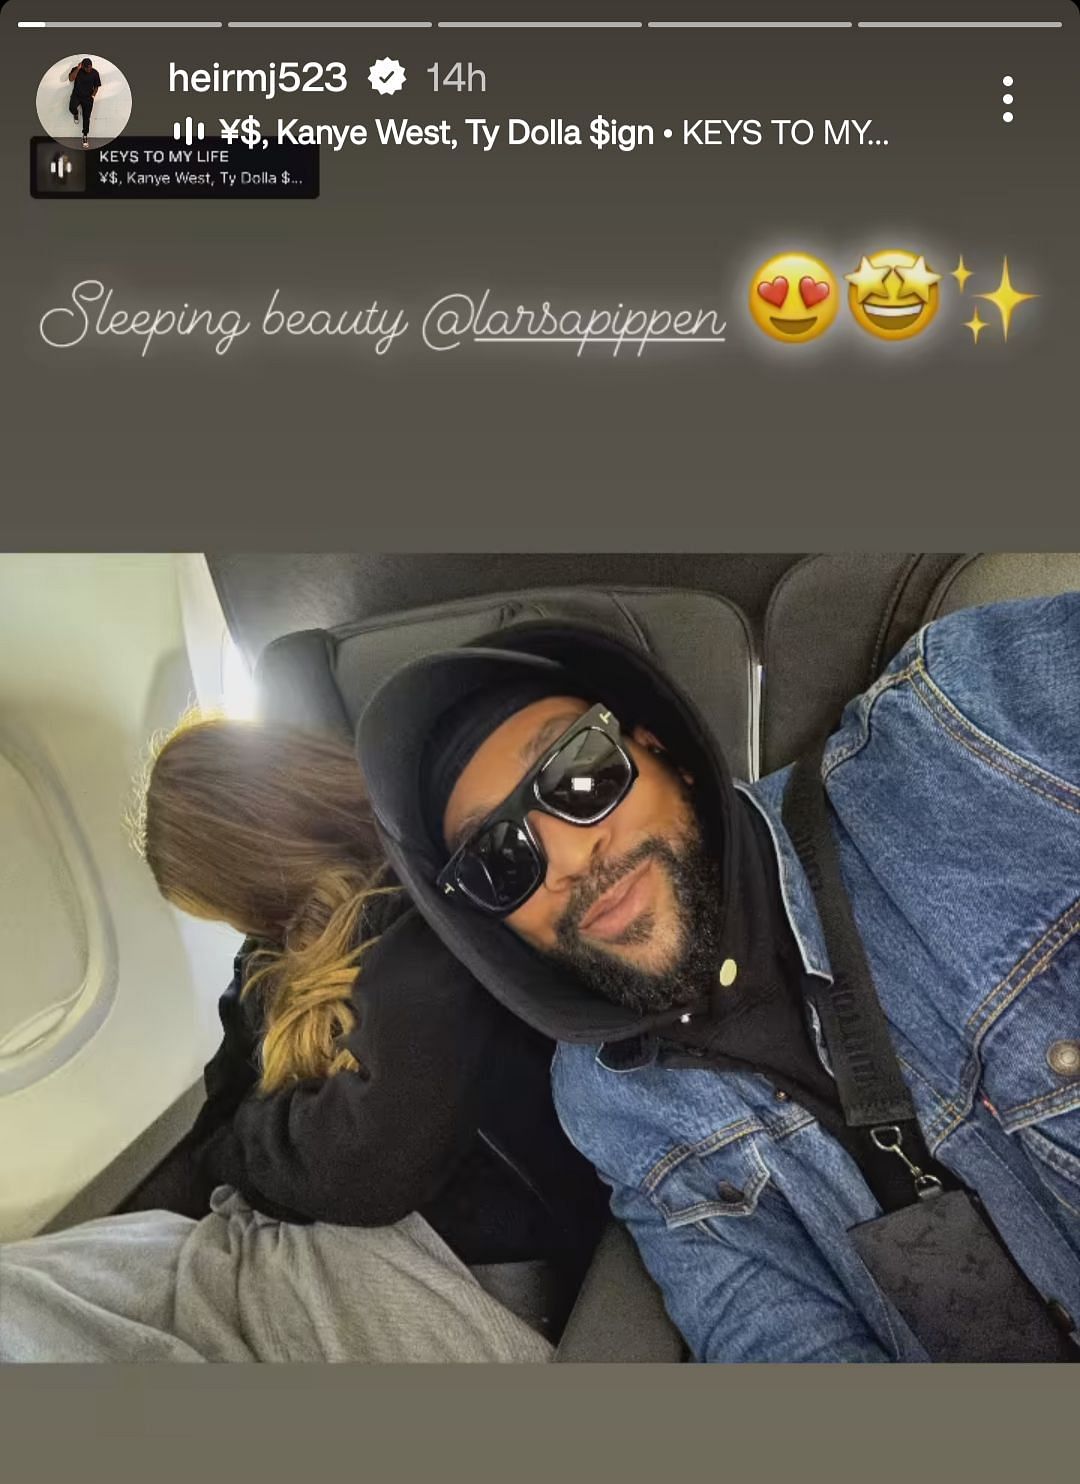 Marcus&#039; Instagram story featuring Larsa sleeping on the plane